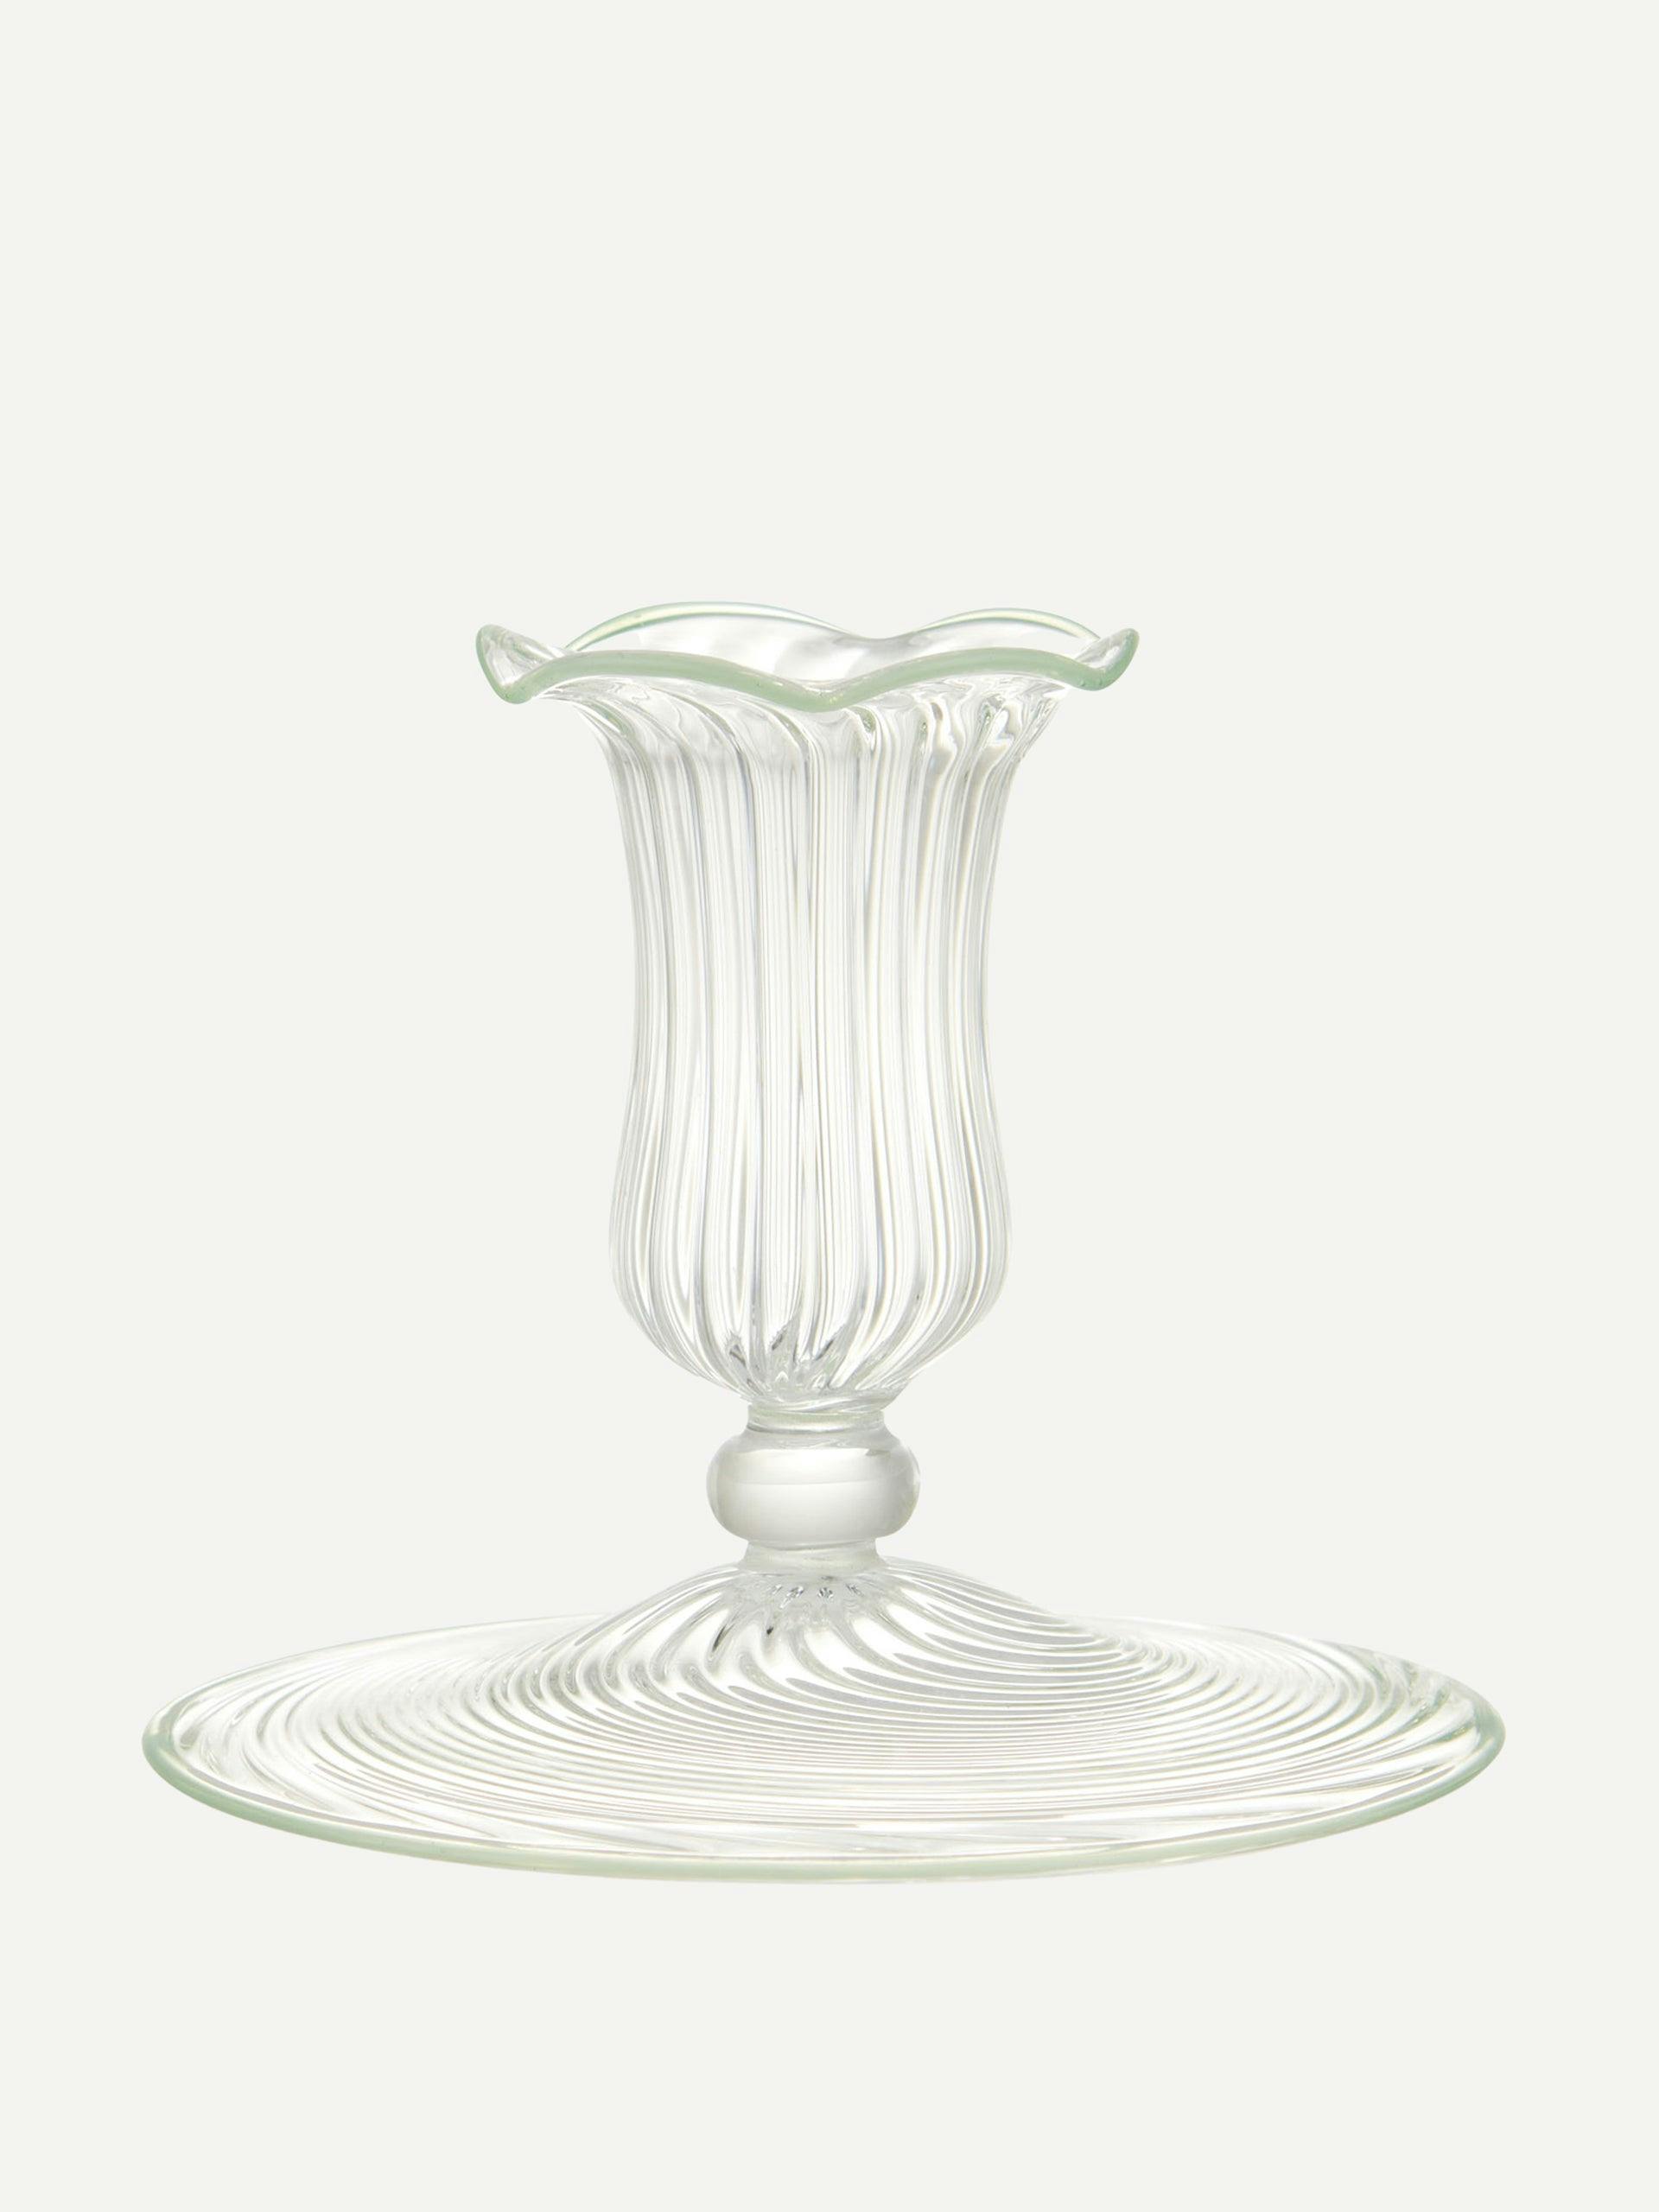 Scalloped green Murano-glass candle holder